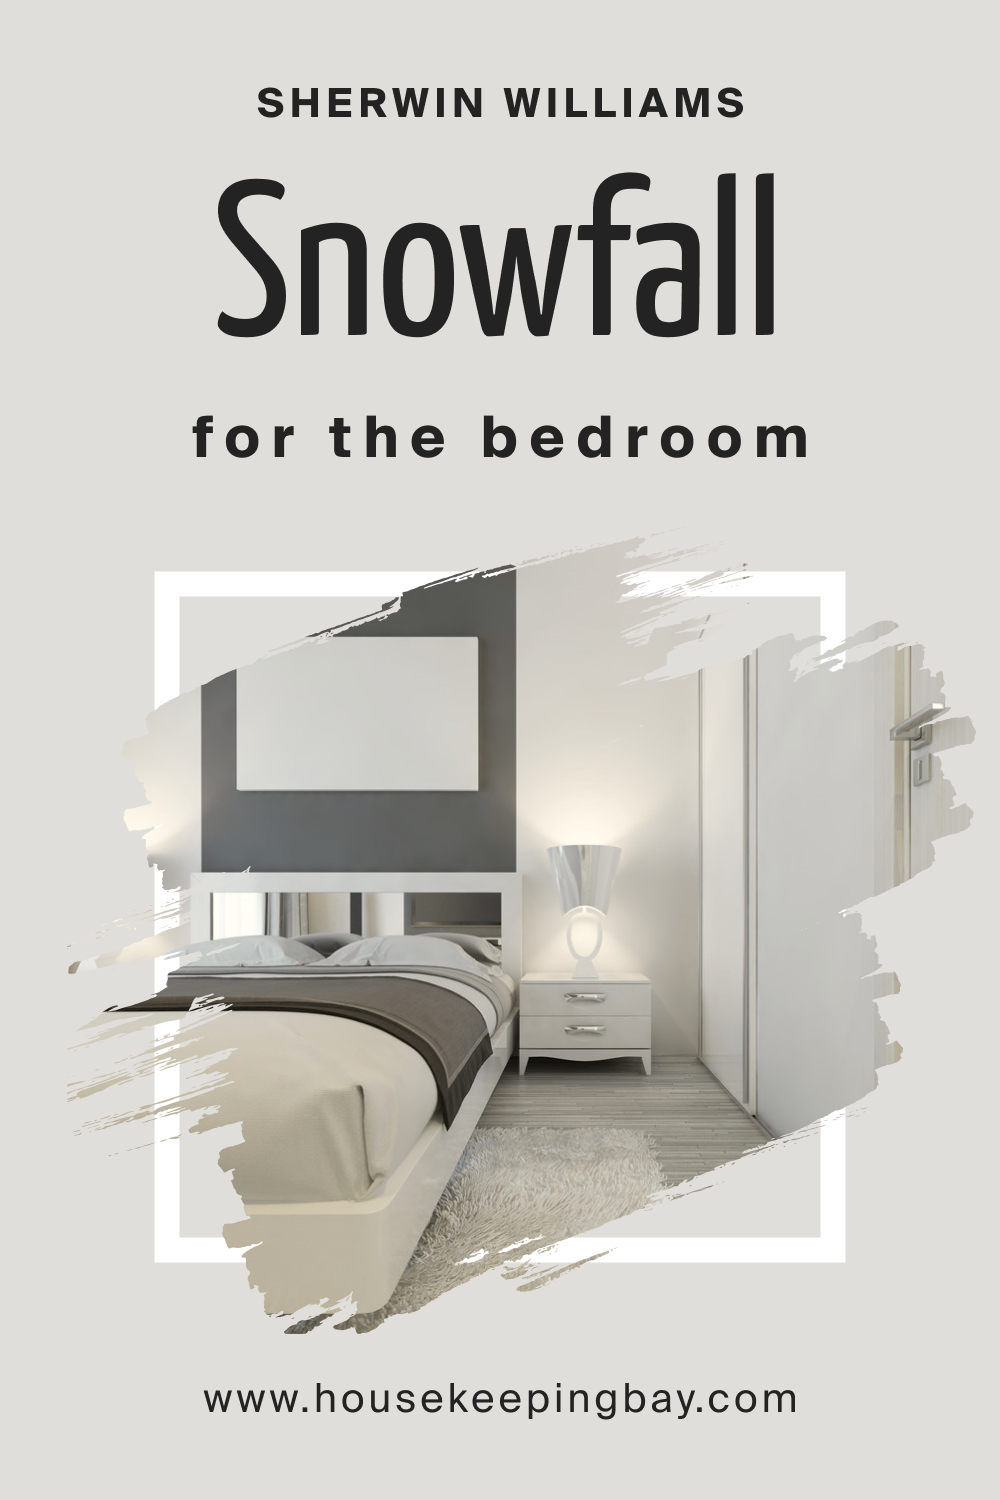 Sherwin Williams. Snowfall For the bedroom